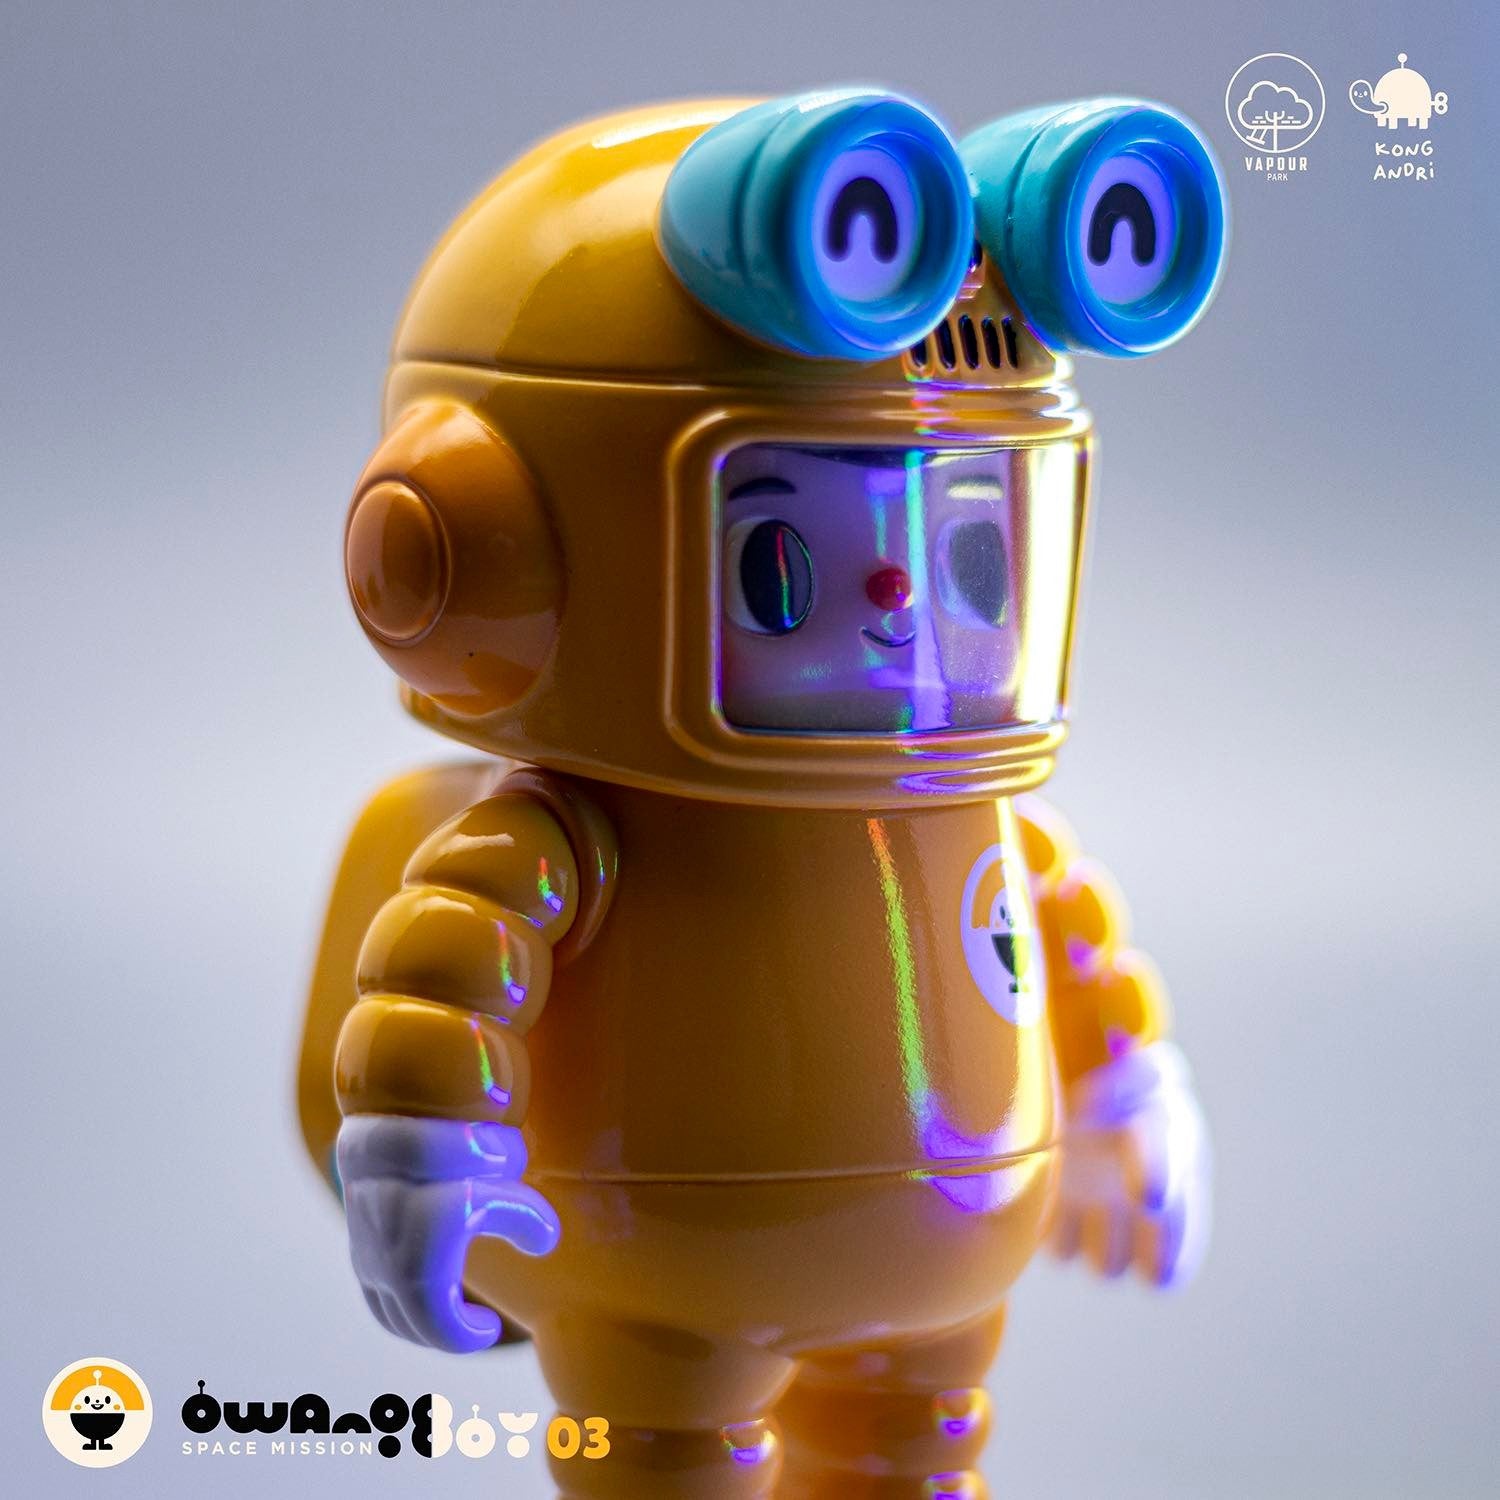 Owangeboy - Space Mission 03 - Yellow Traveler by Kong Andri & Vapourpark